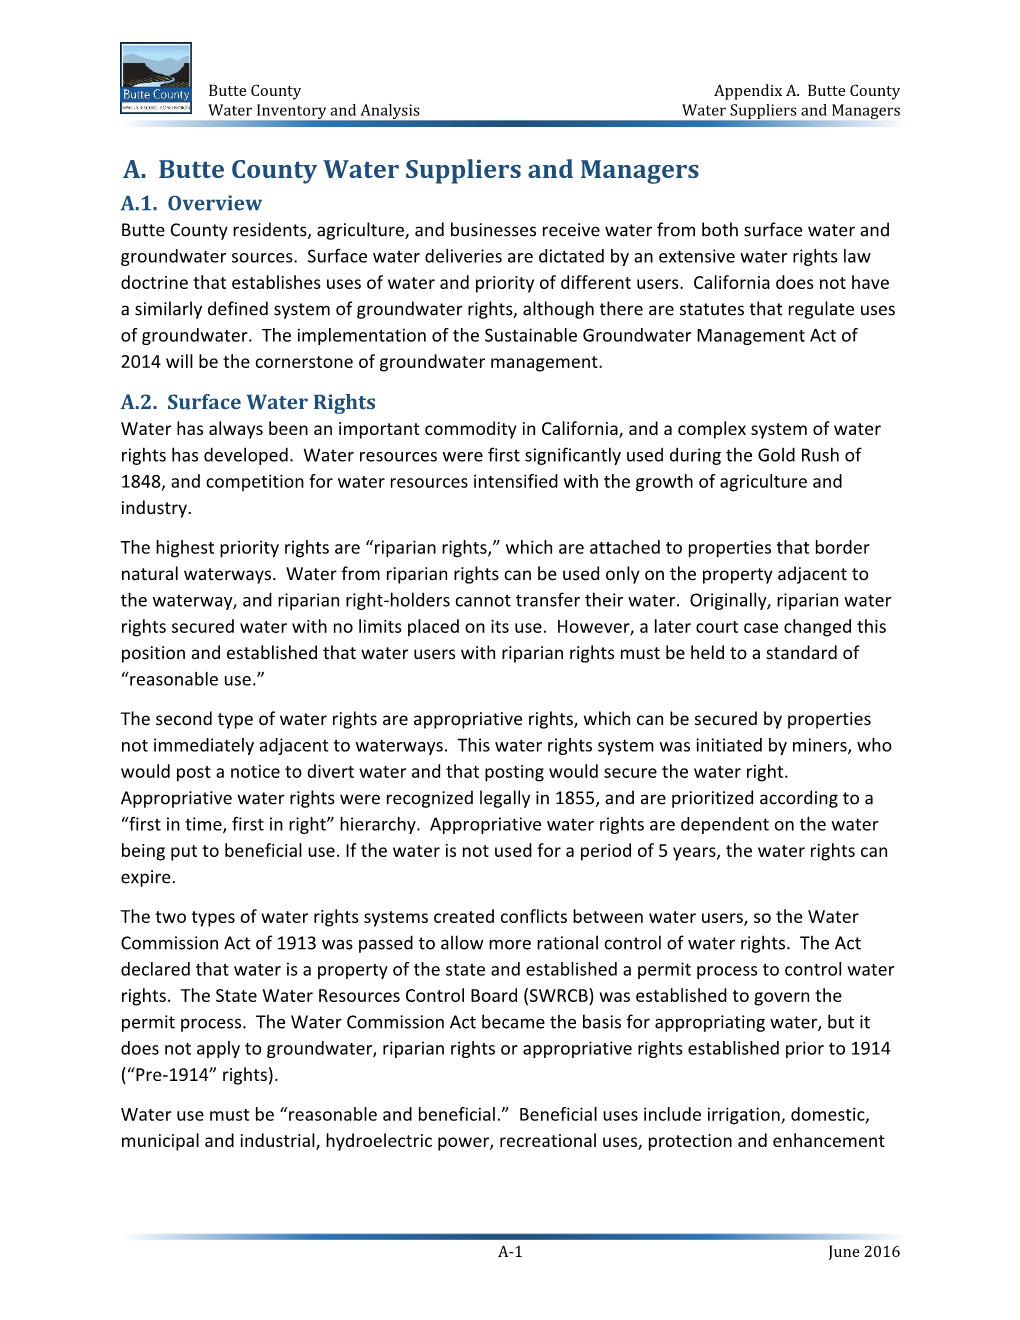 A. Butte County Water Suppliers and Managers A.1